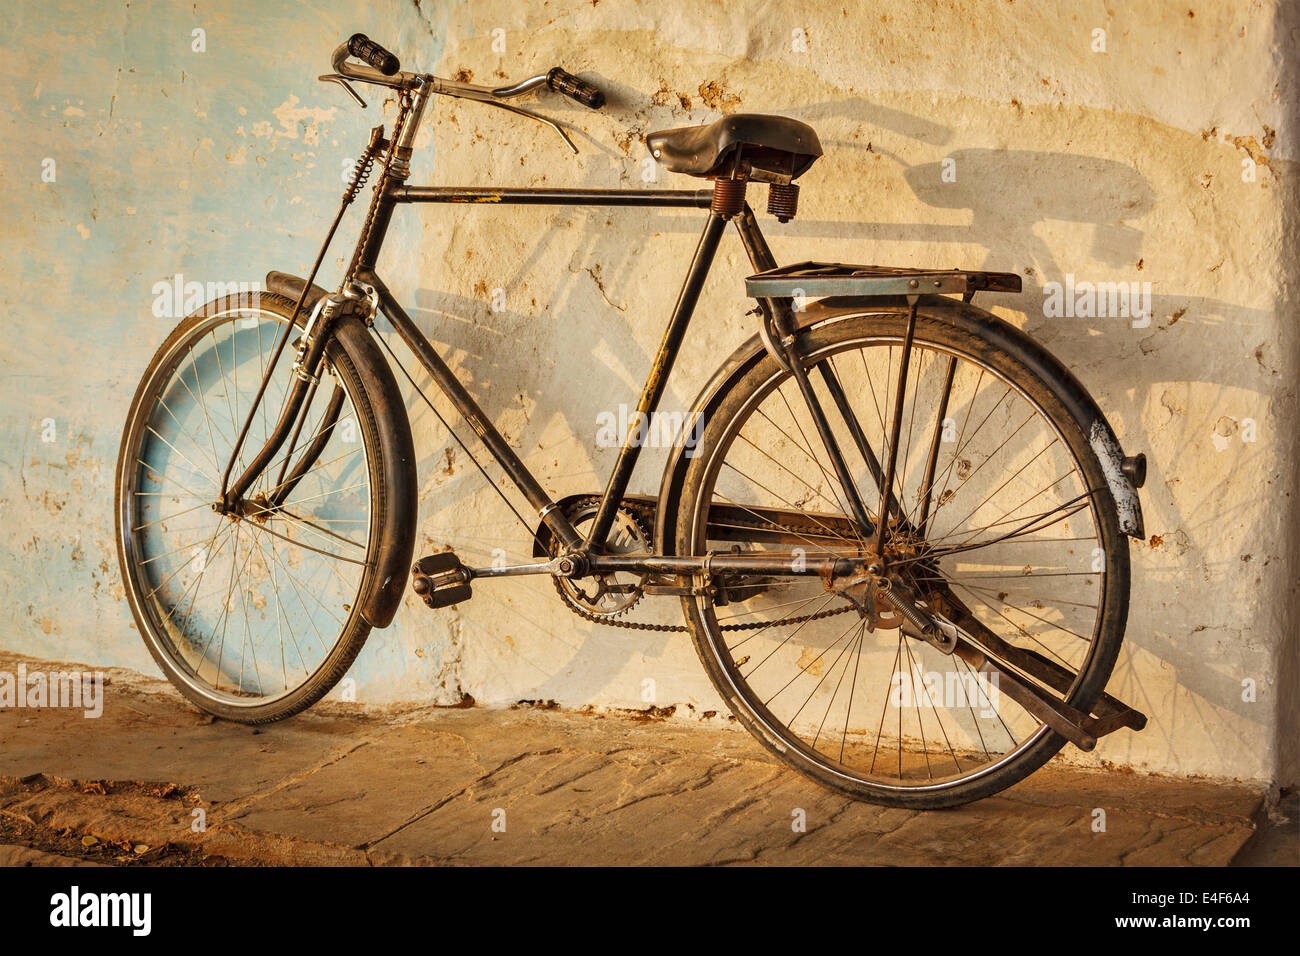 Old Indian bicycle in the street of India Stock Photo